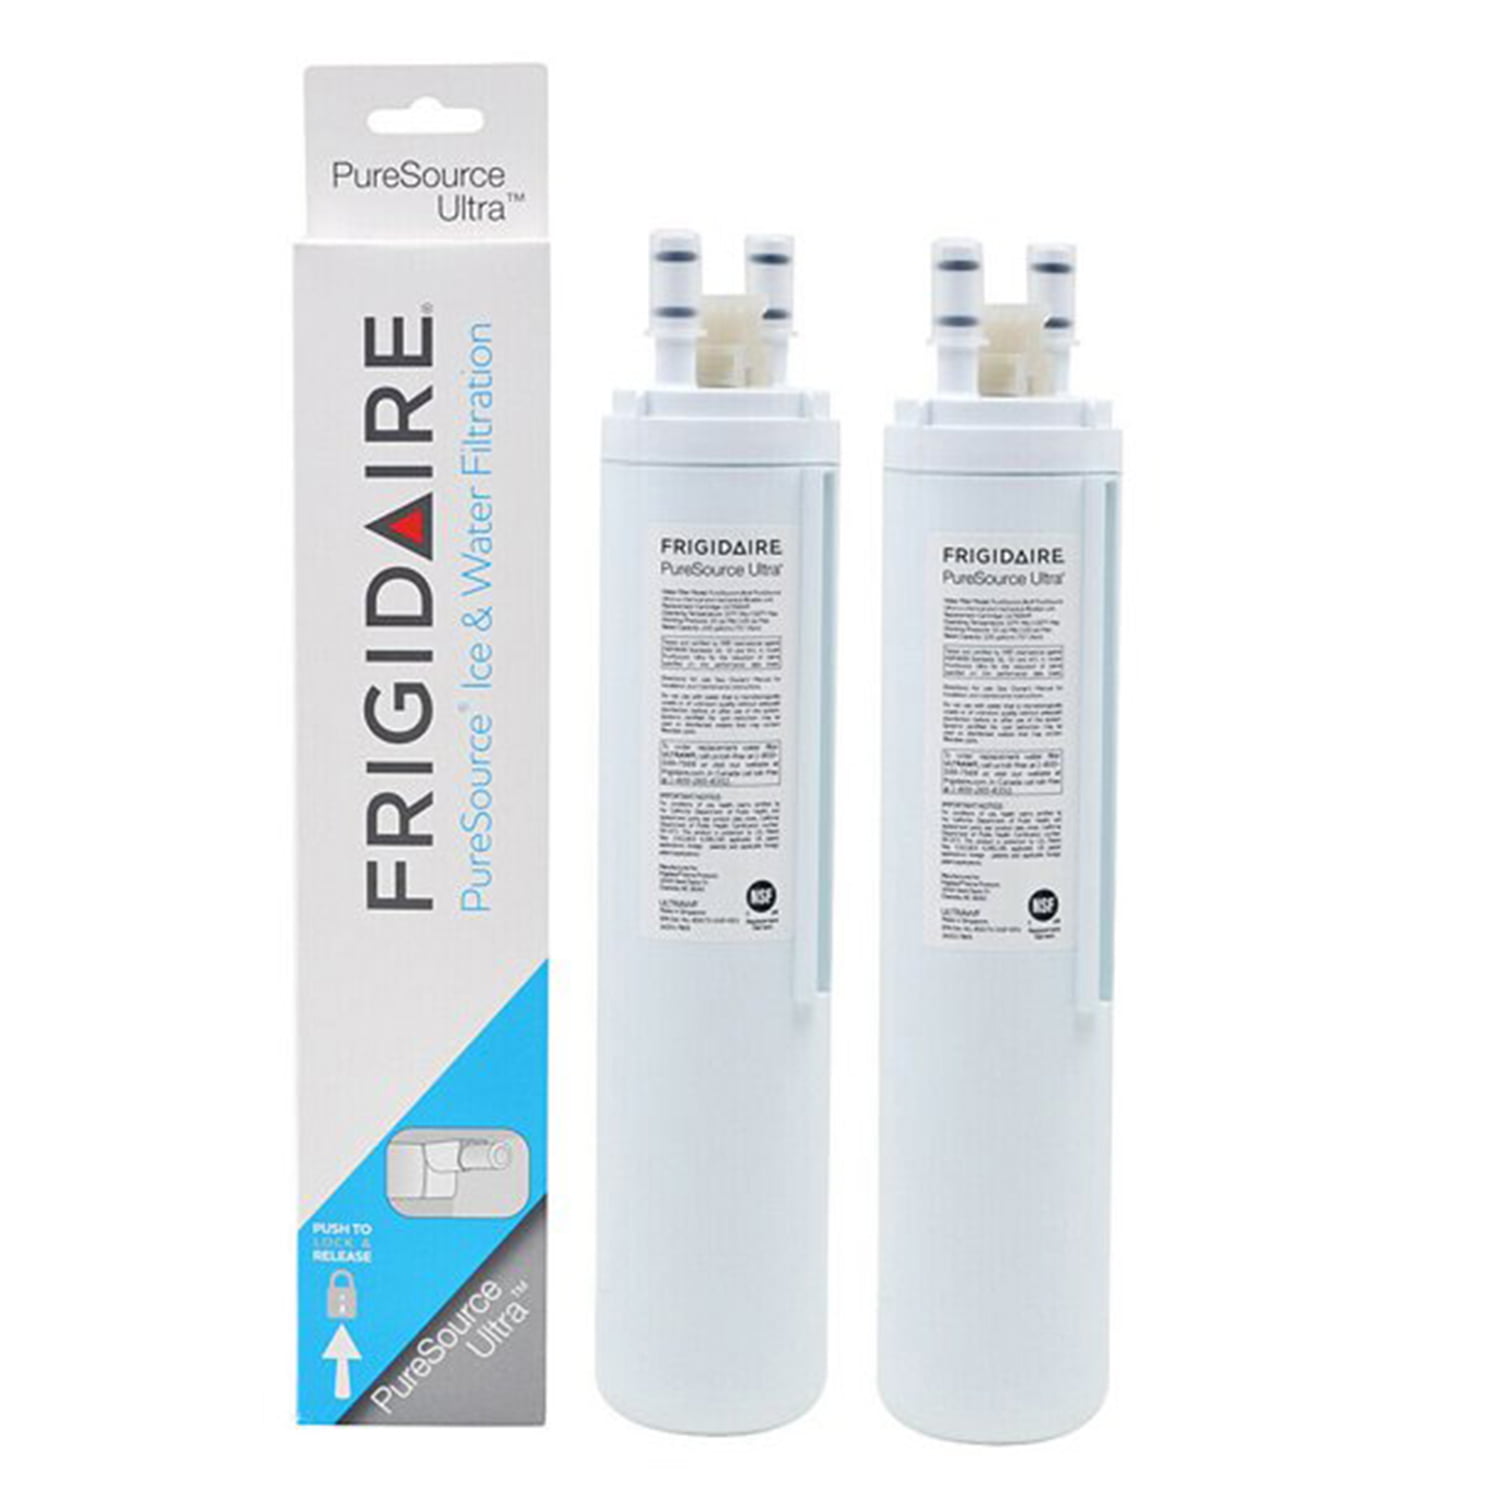 White for Puresource Ice & Water Filtration NEW Frigidaire ULTRAWF Filter 